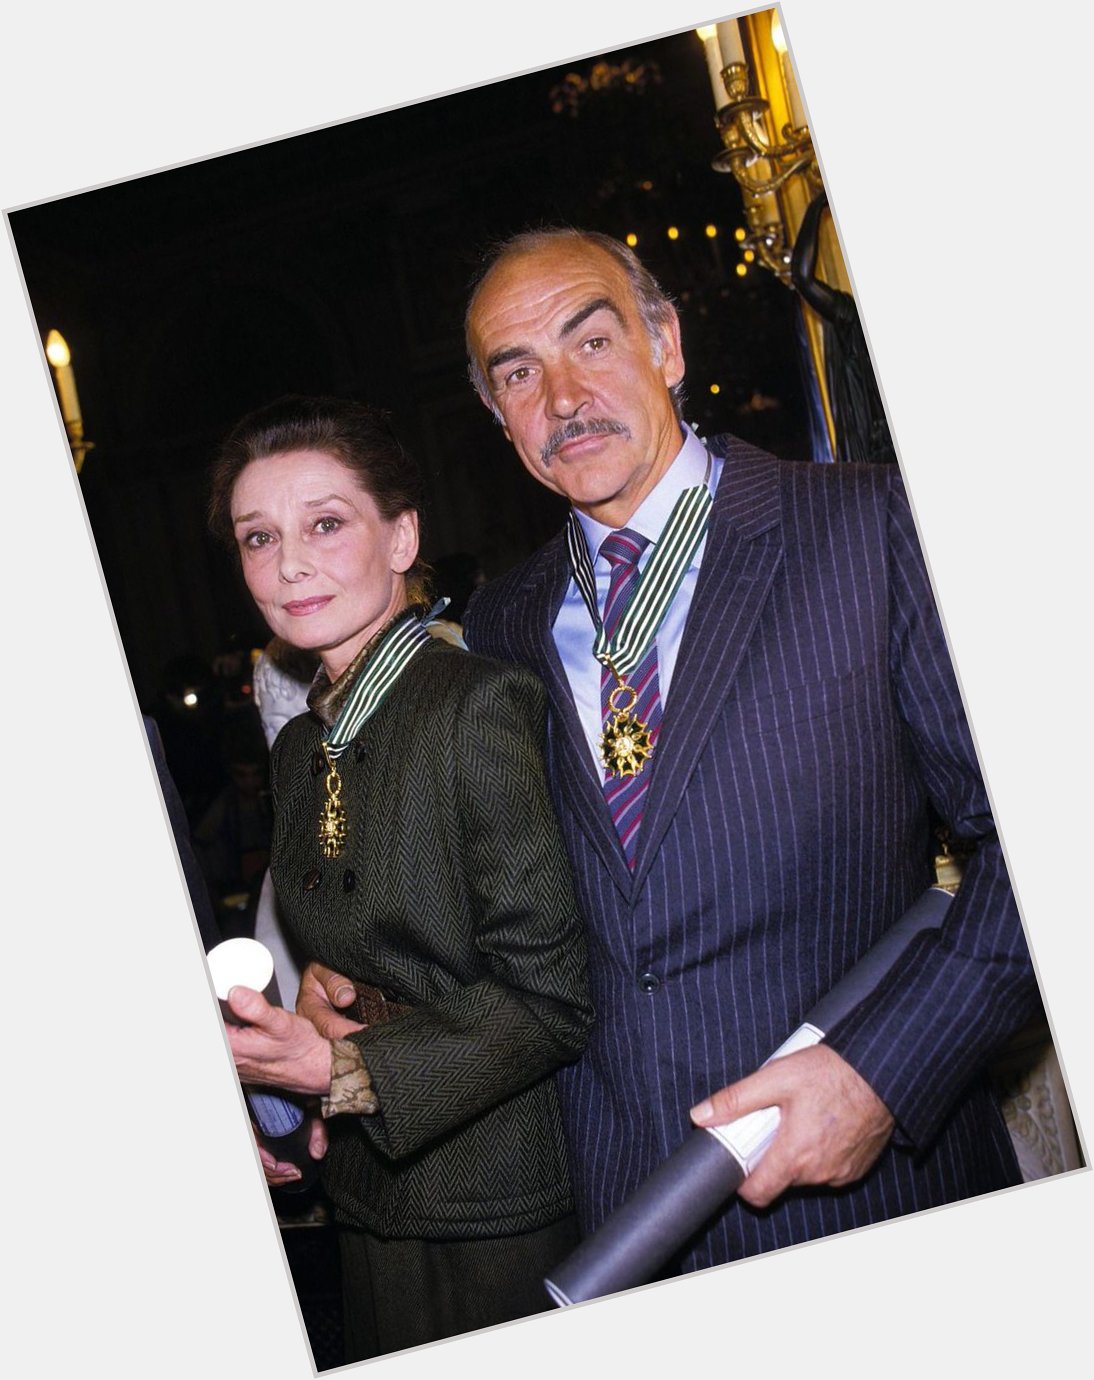 Happy Birthday, Sean Connery! Connery photographed with Audrey Hepburn at a Paris awards show, 1987 